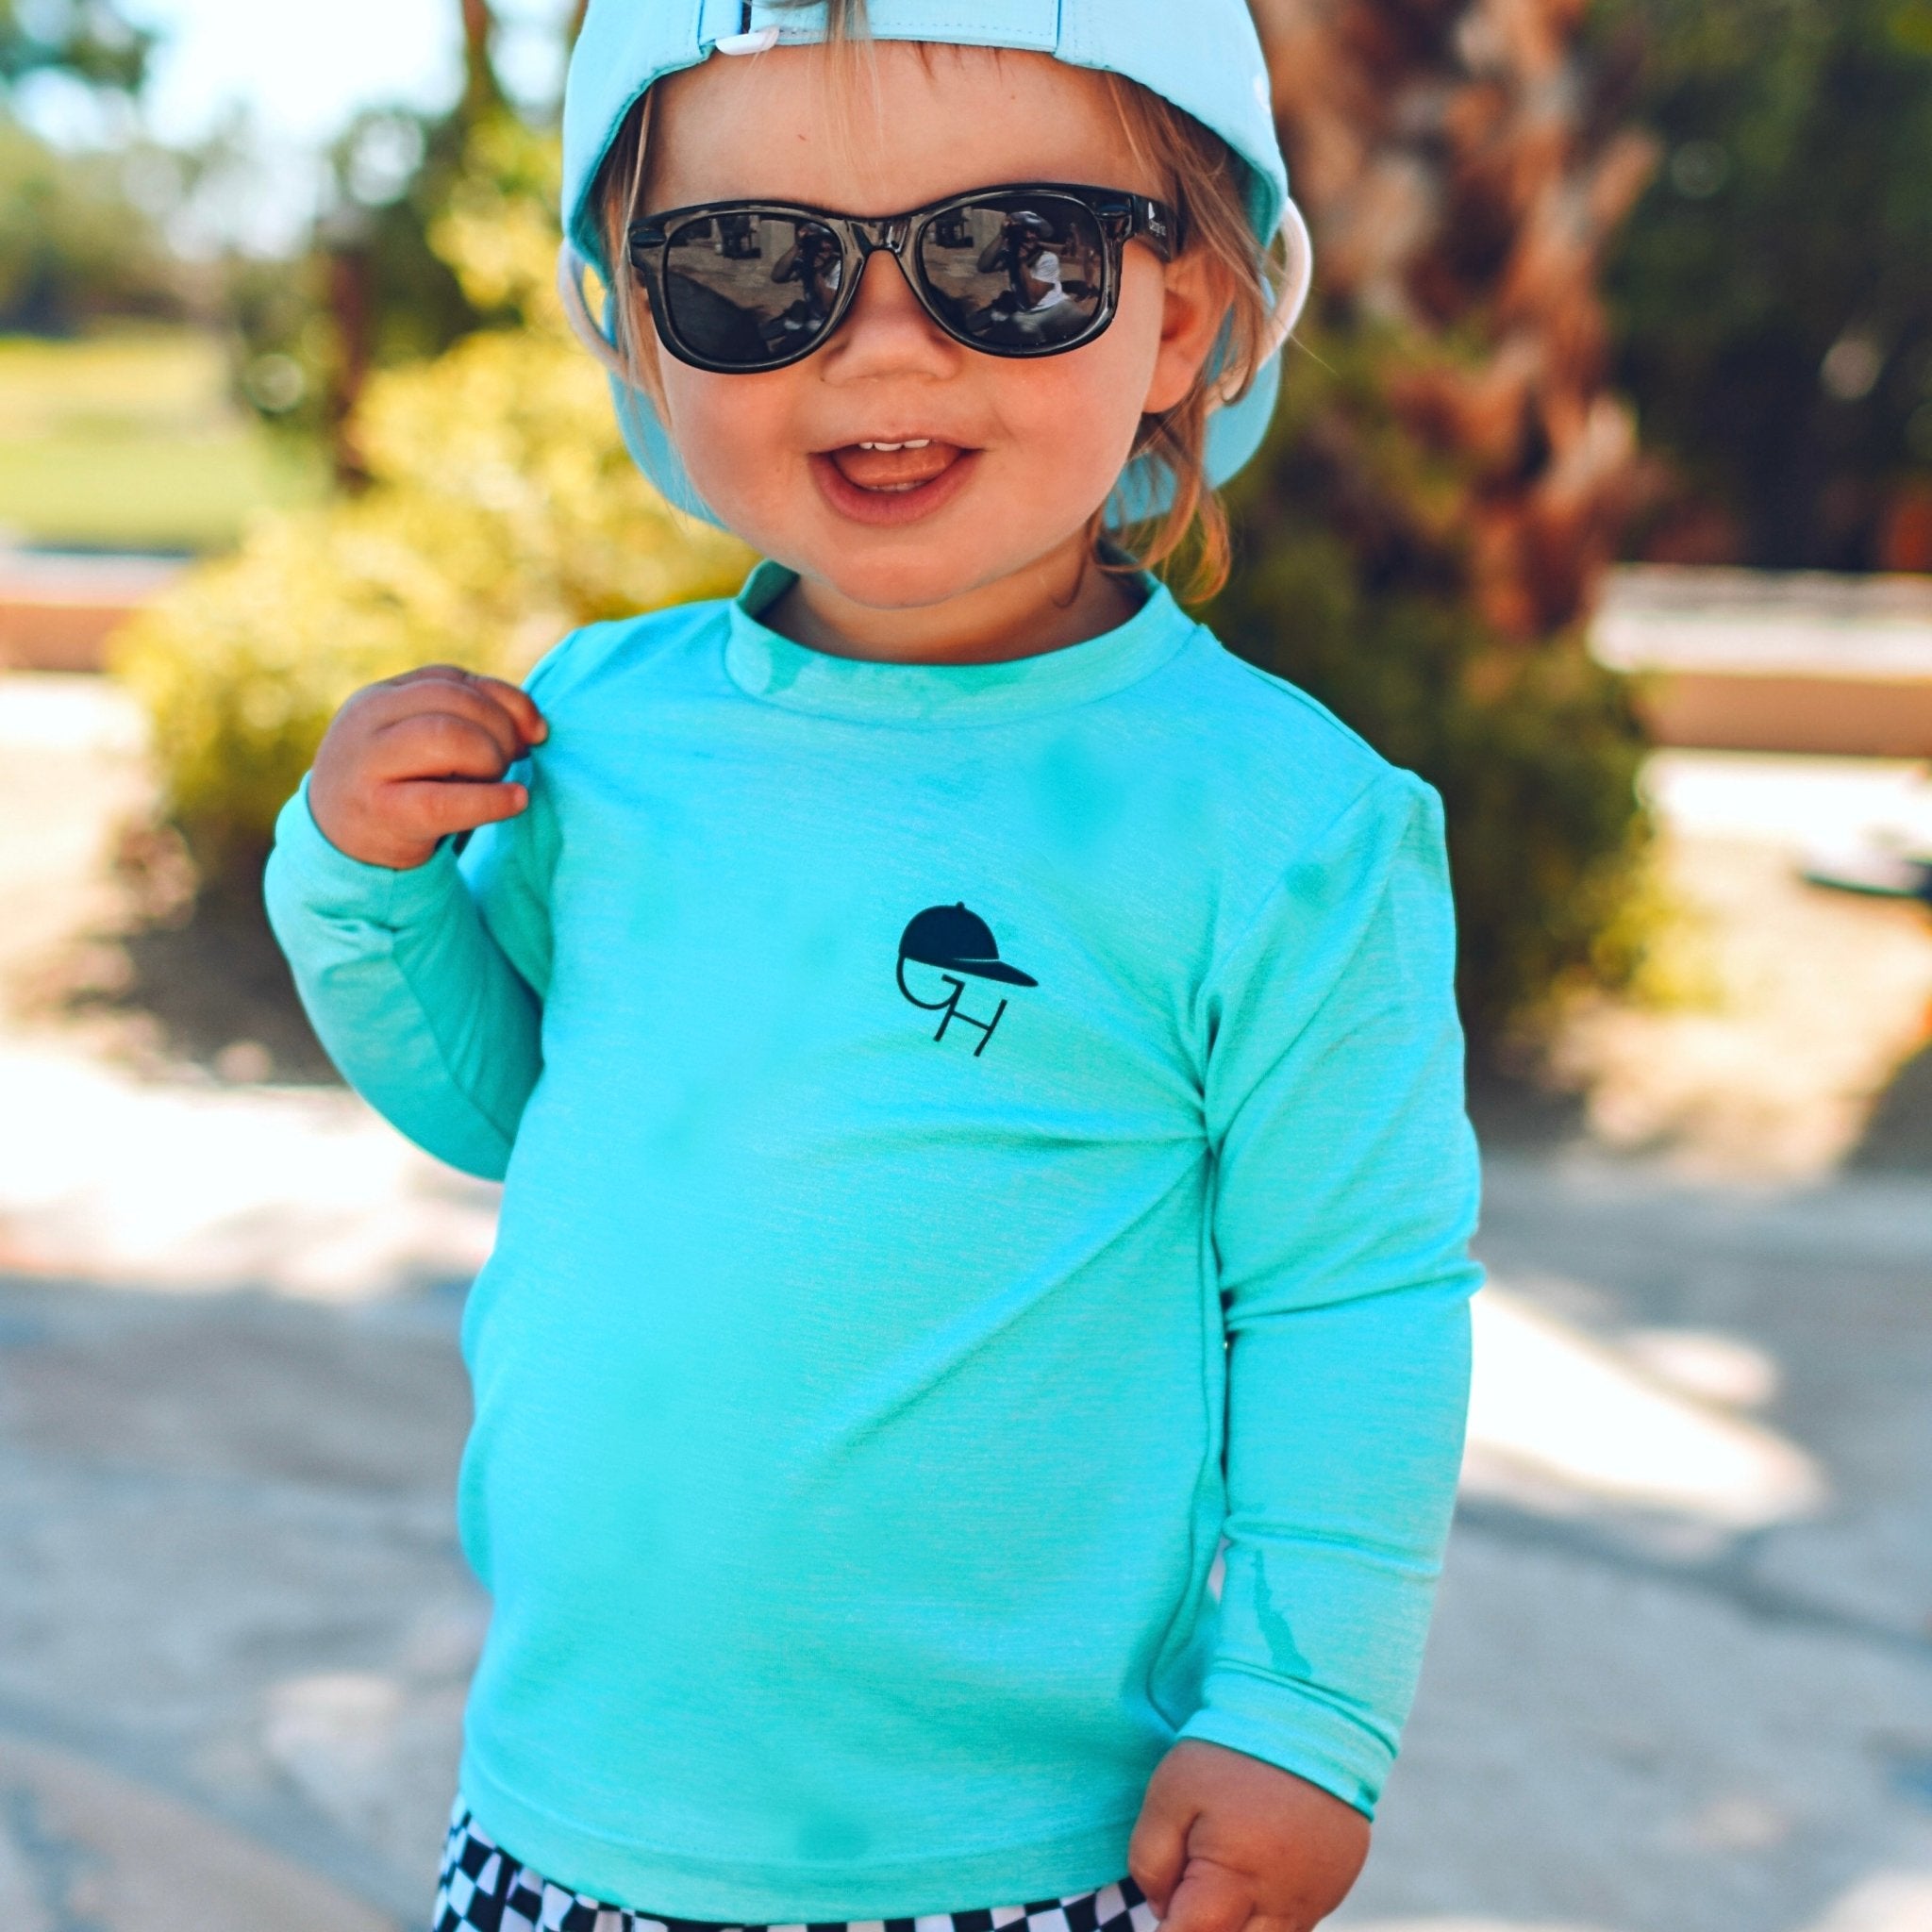 Hooded Protective Sun Shirt, Save your kids skin from the harsh sun